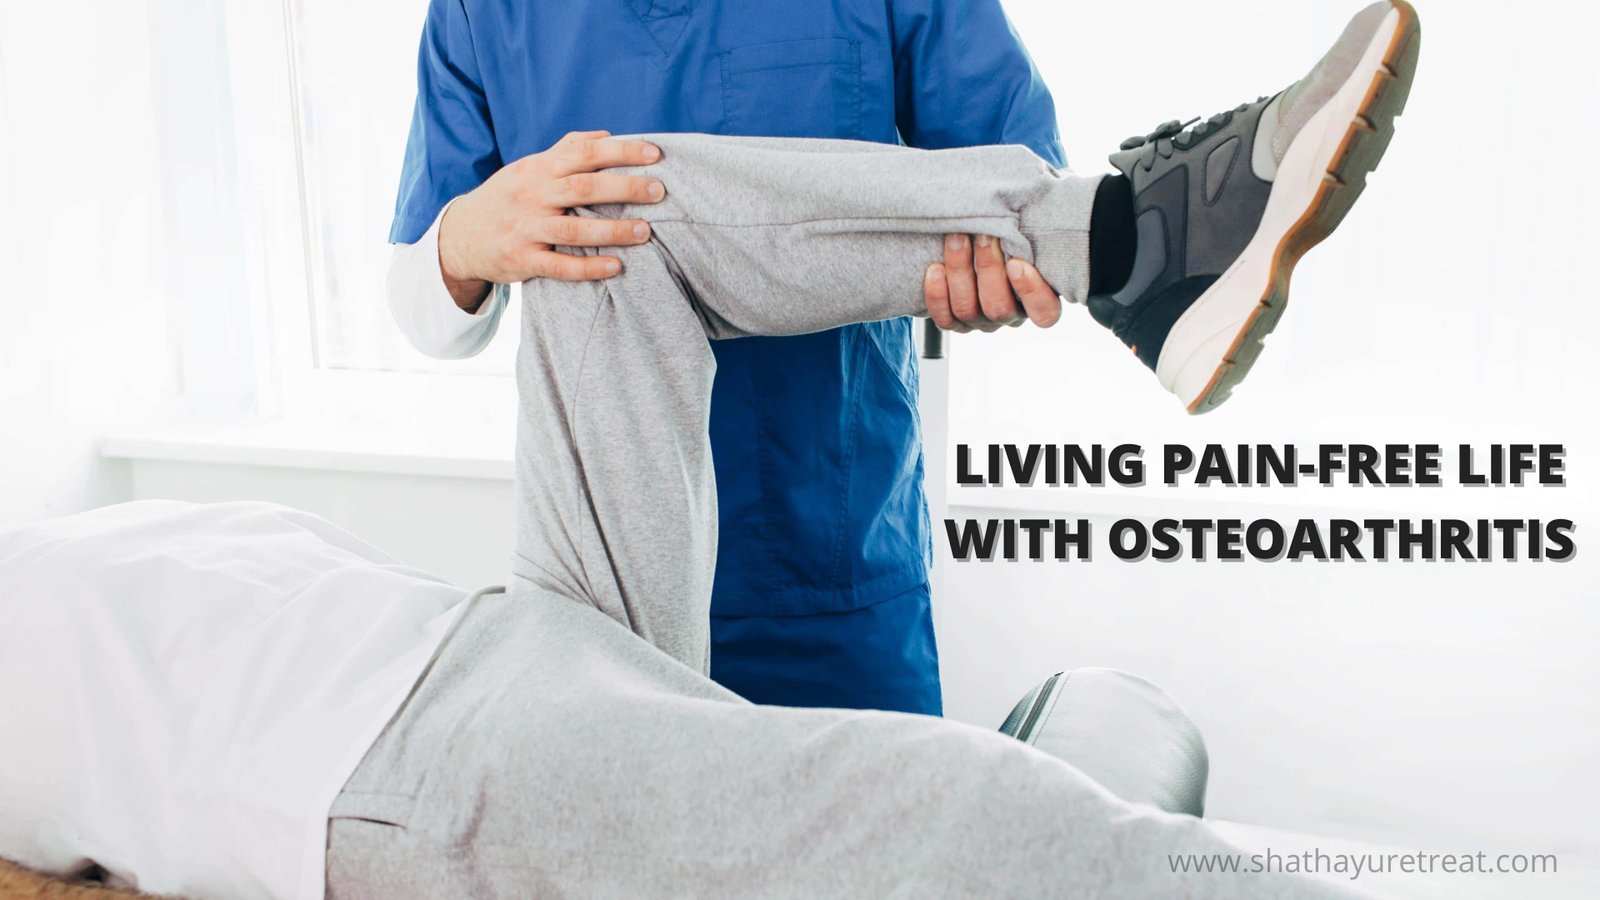 Living Pain-Free Life With Osteoarthritis